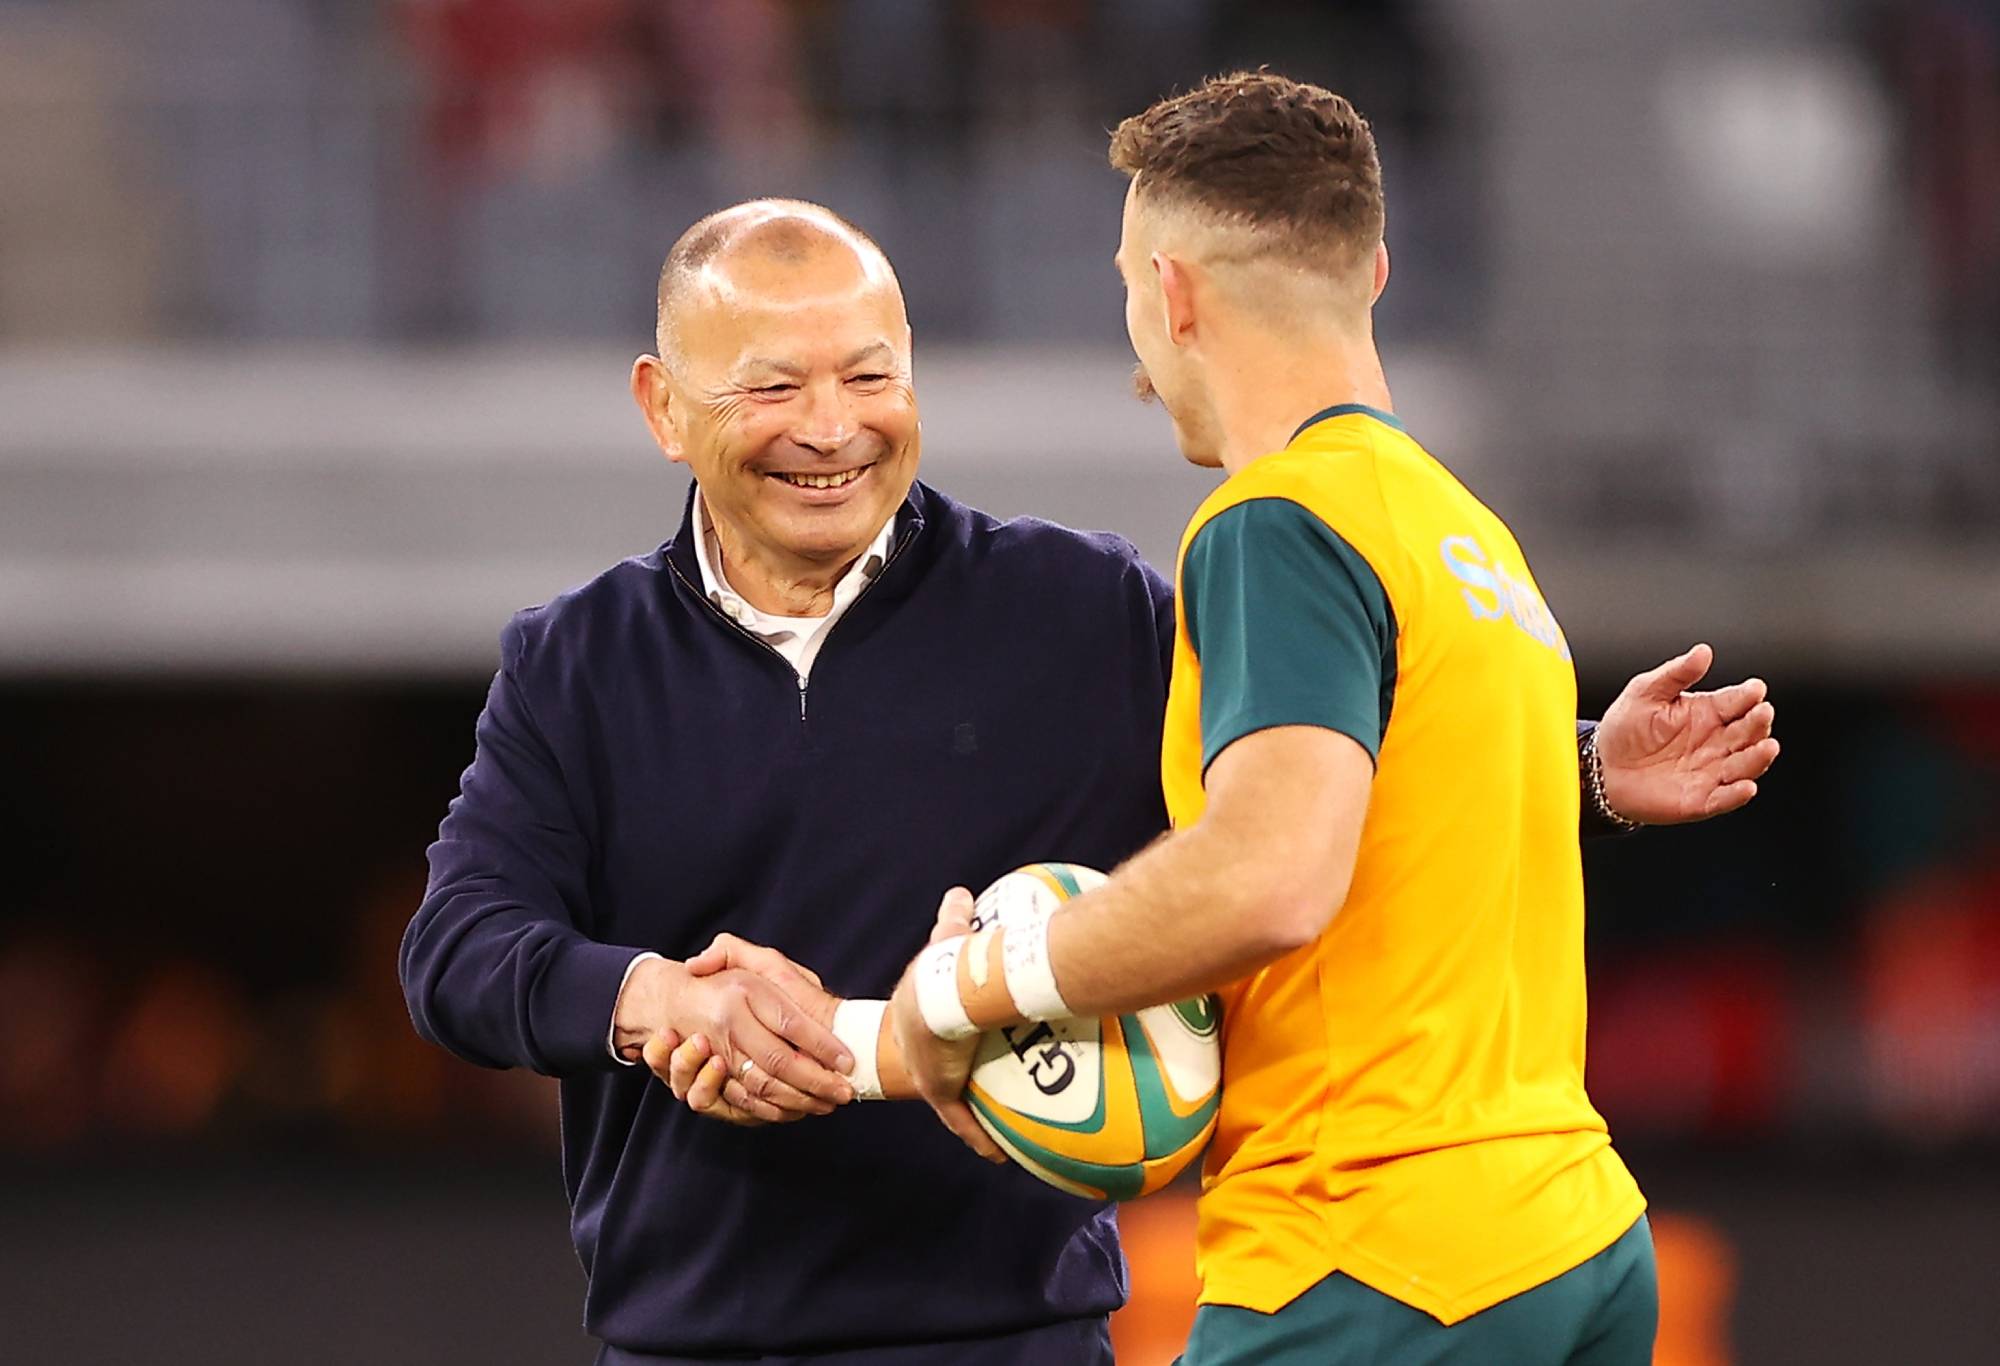 PERTH, AUSTRALIA - JULY 02: England coach Eddie Jones shakes hands with Nic White of the Wallabies during the warm-up before game one of the international test match series between the Australian Wallabies and England at Optus Stadium on July 02, 2022 in Perth, Australia. (Photo by Mark Kolbe/Getty Images)